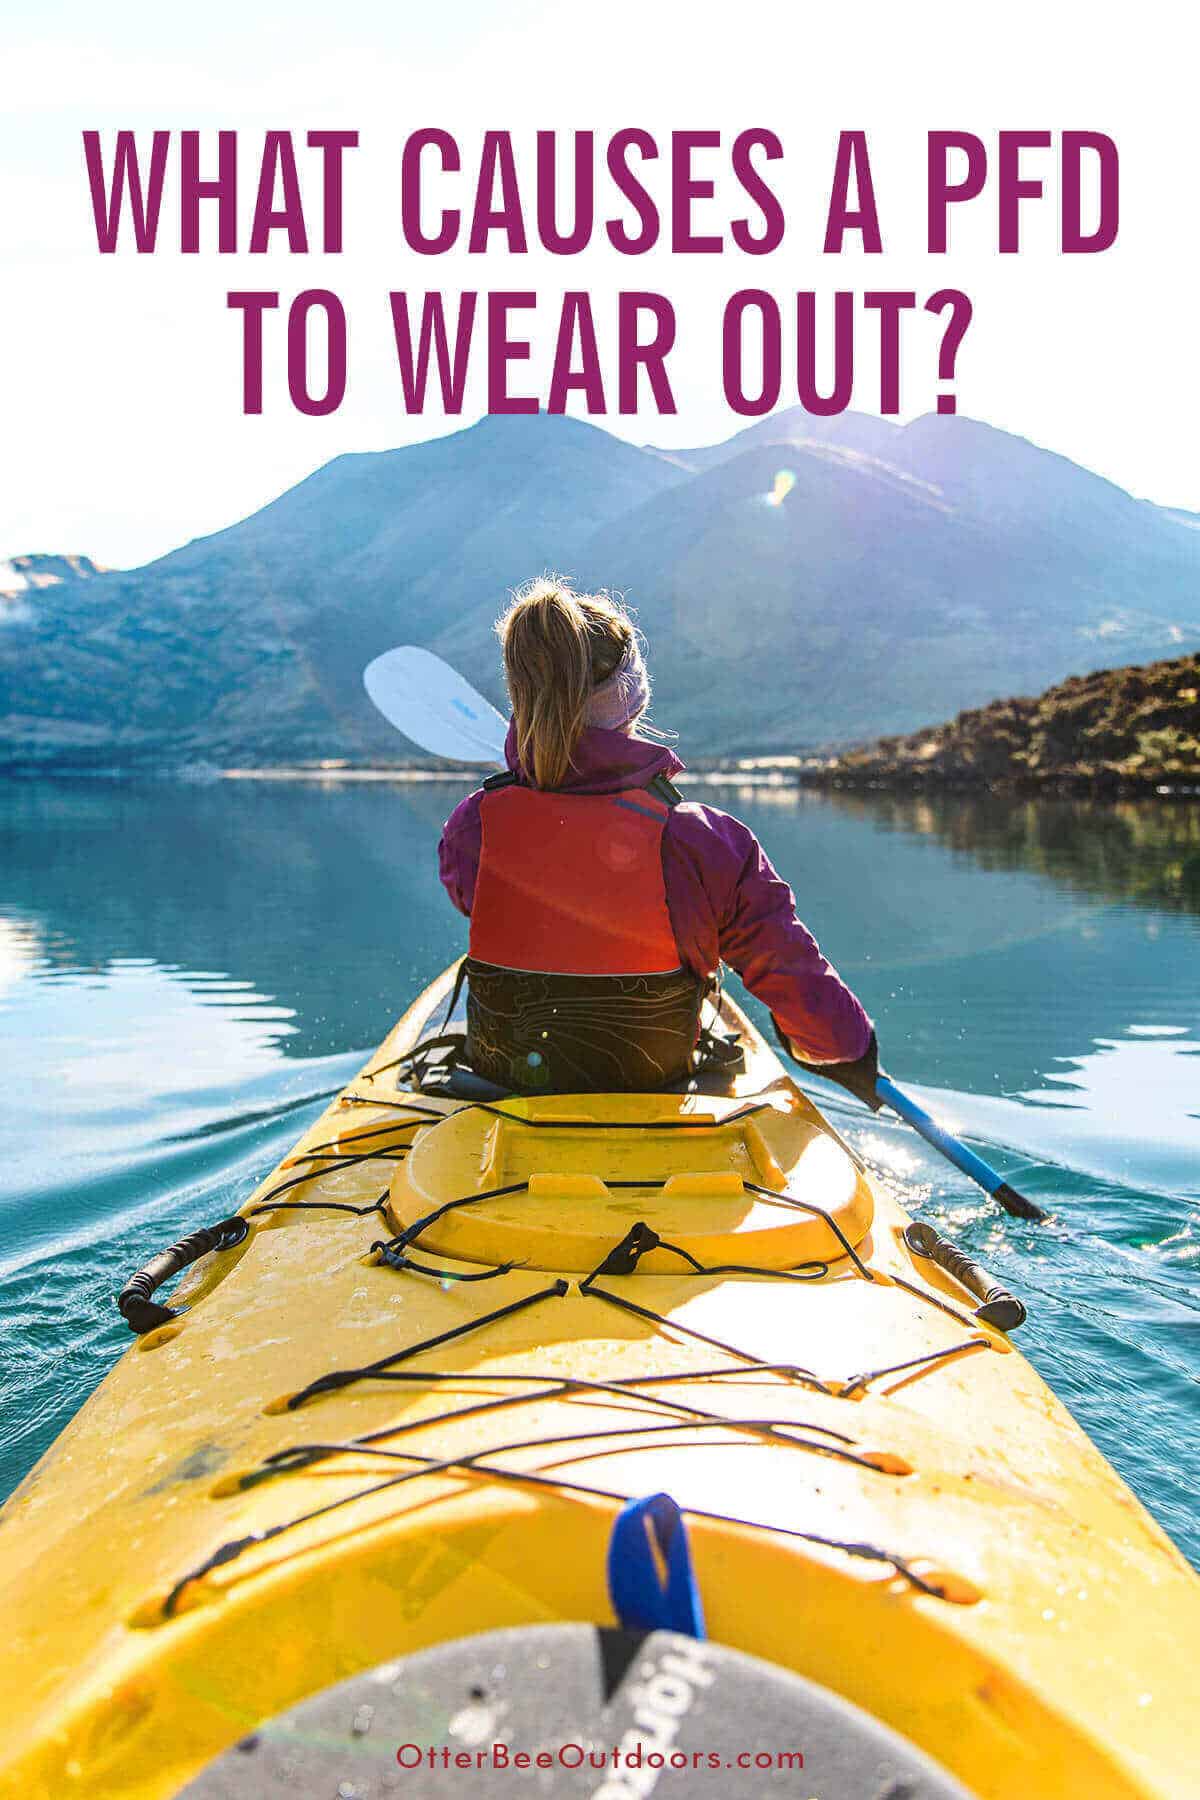 A woman wearing a PFD paddling in the front of a tandem kayak on a beautiful lake at the base of a mountain range. The graphic asks, "What Causes a PFD to Wear Out?"